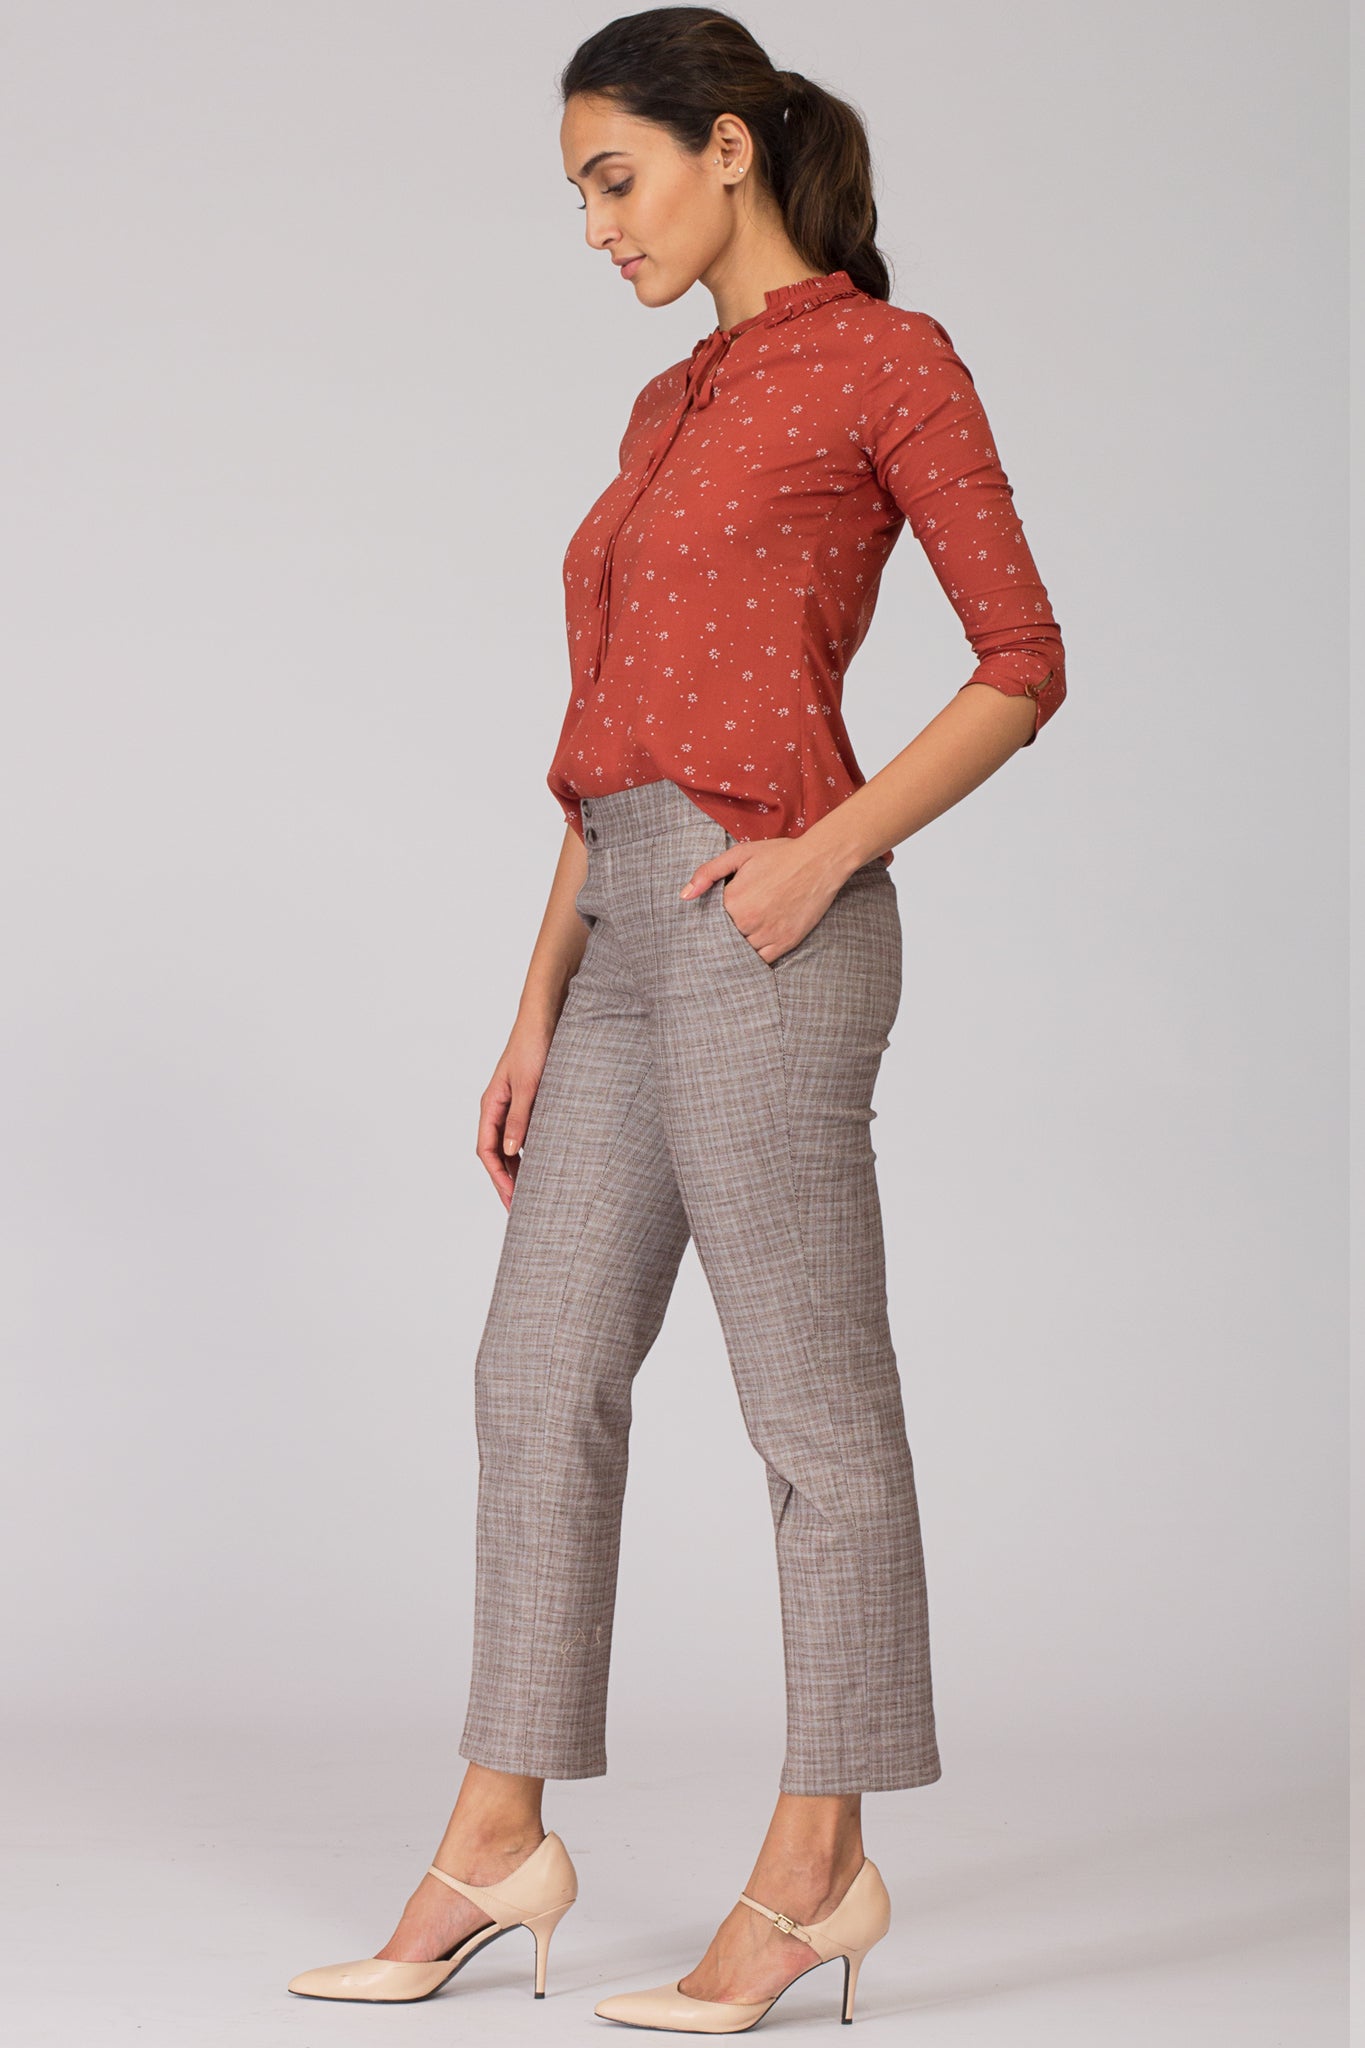 Cropped Pants For Women